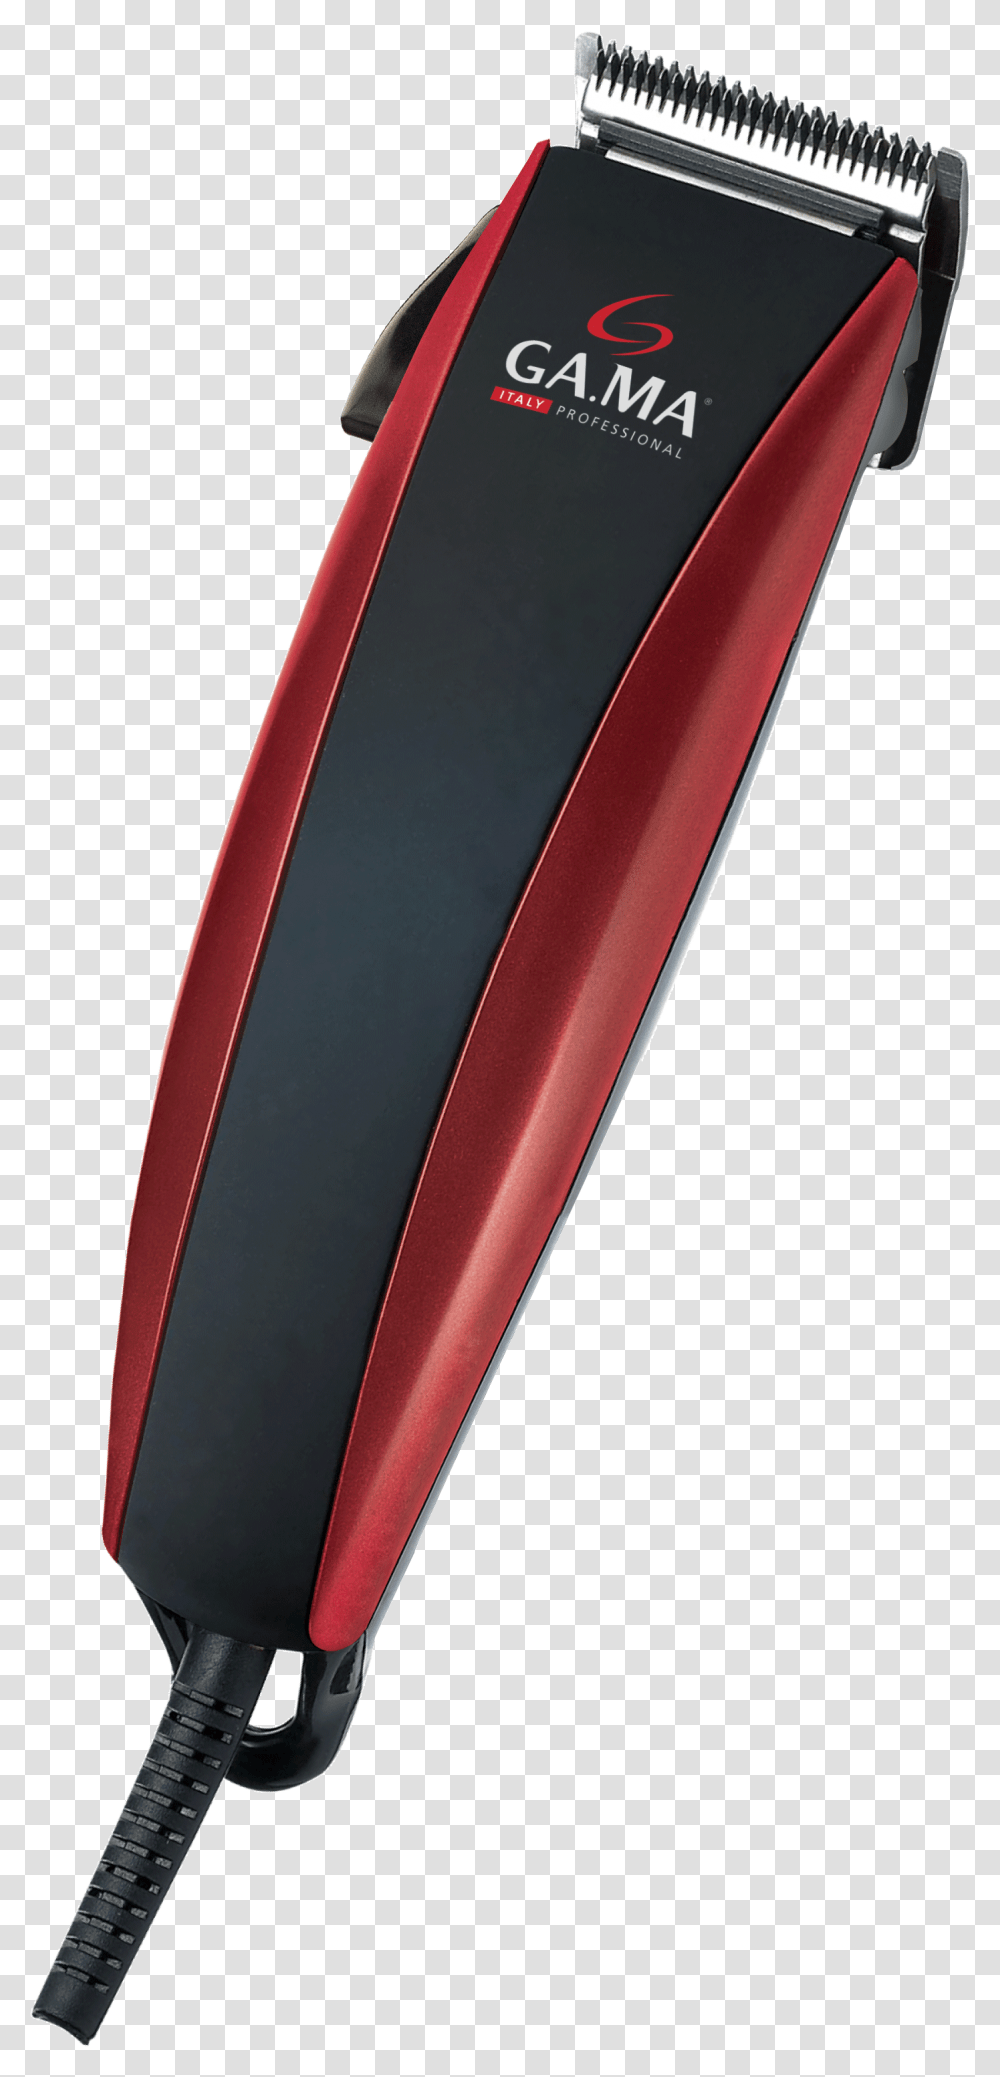 Professional Magnetic Clipper Gm560 J 13 Piezas Ga.ma, Weapon, Weaponry, Blade, Letter Opener Transparent Png